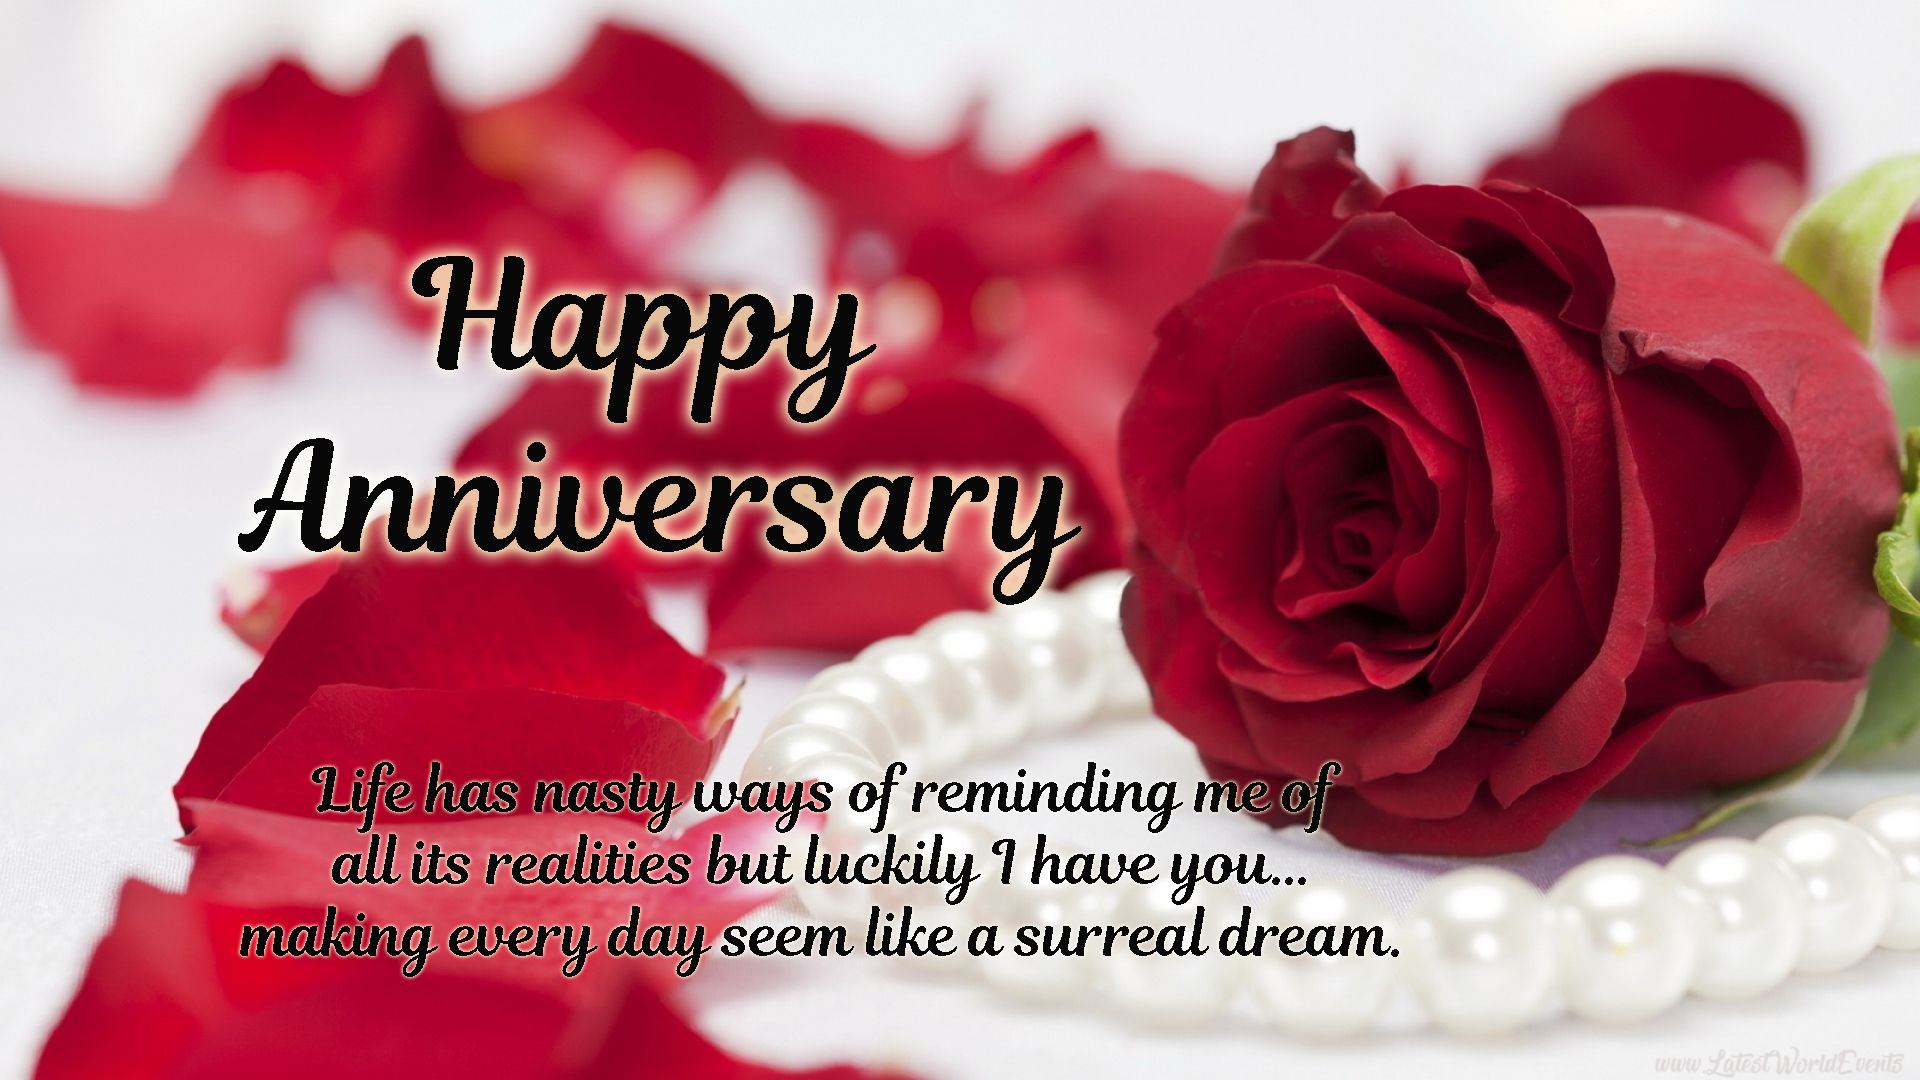 Awesome-anniversary-wishes-quotes-for-husband